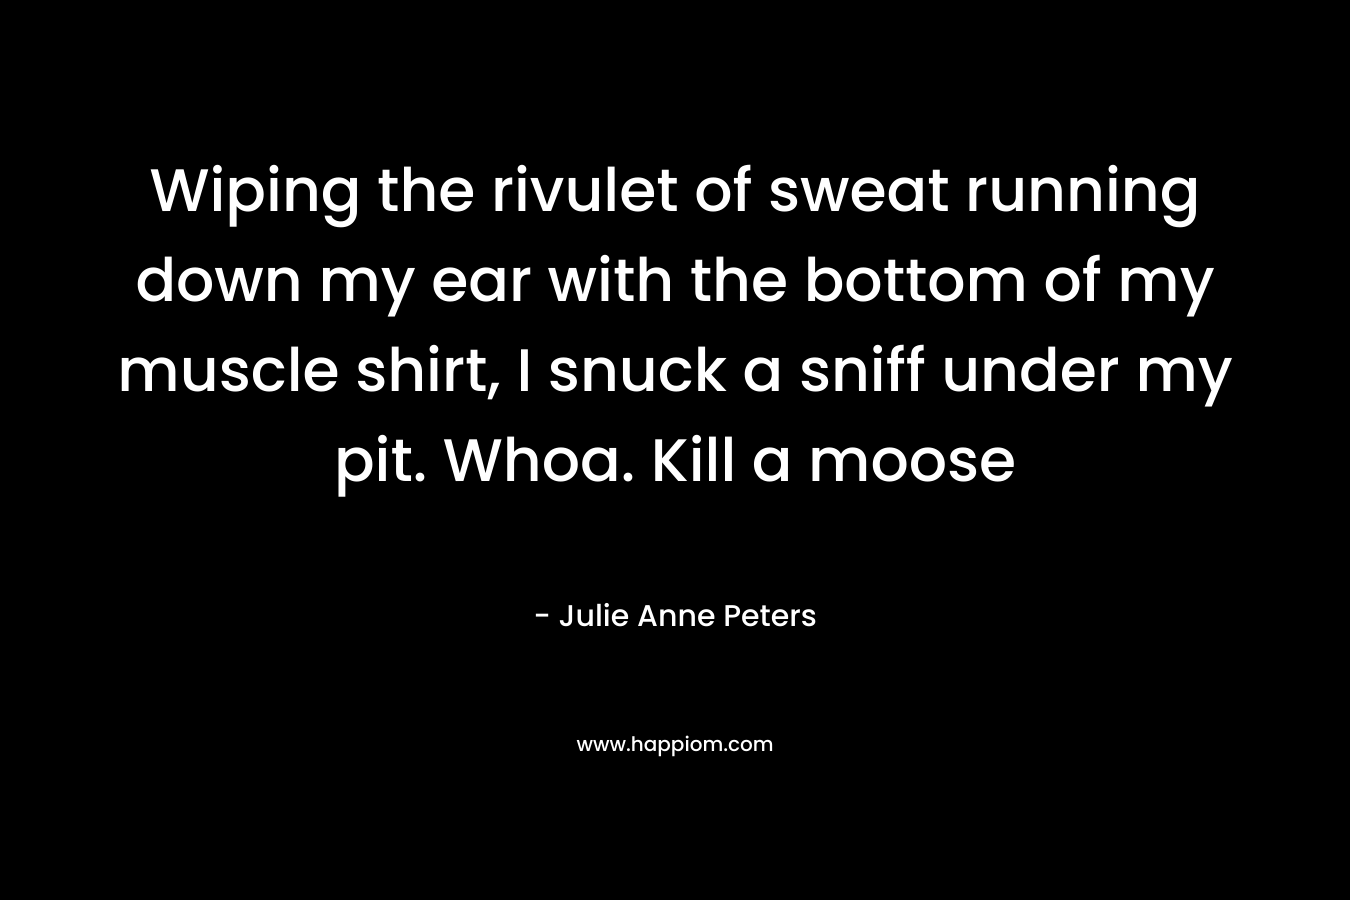 Wiping the rivulet of sweat running down my ear with the bottom of my muscle shirt, I snuck a sniff under my pit. Whoa. Kill a moose – Julie Anne Peters